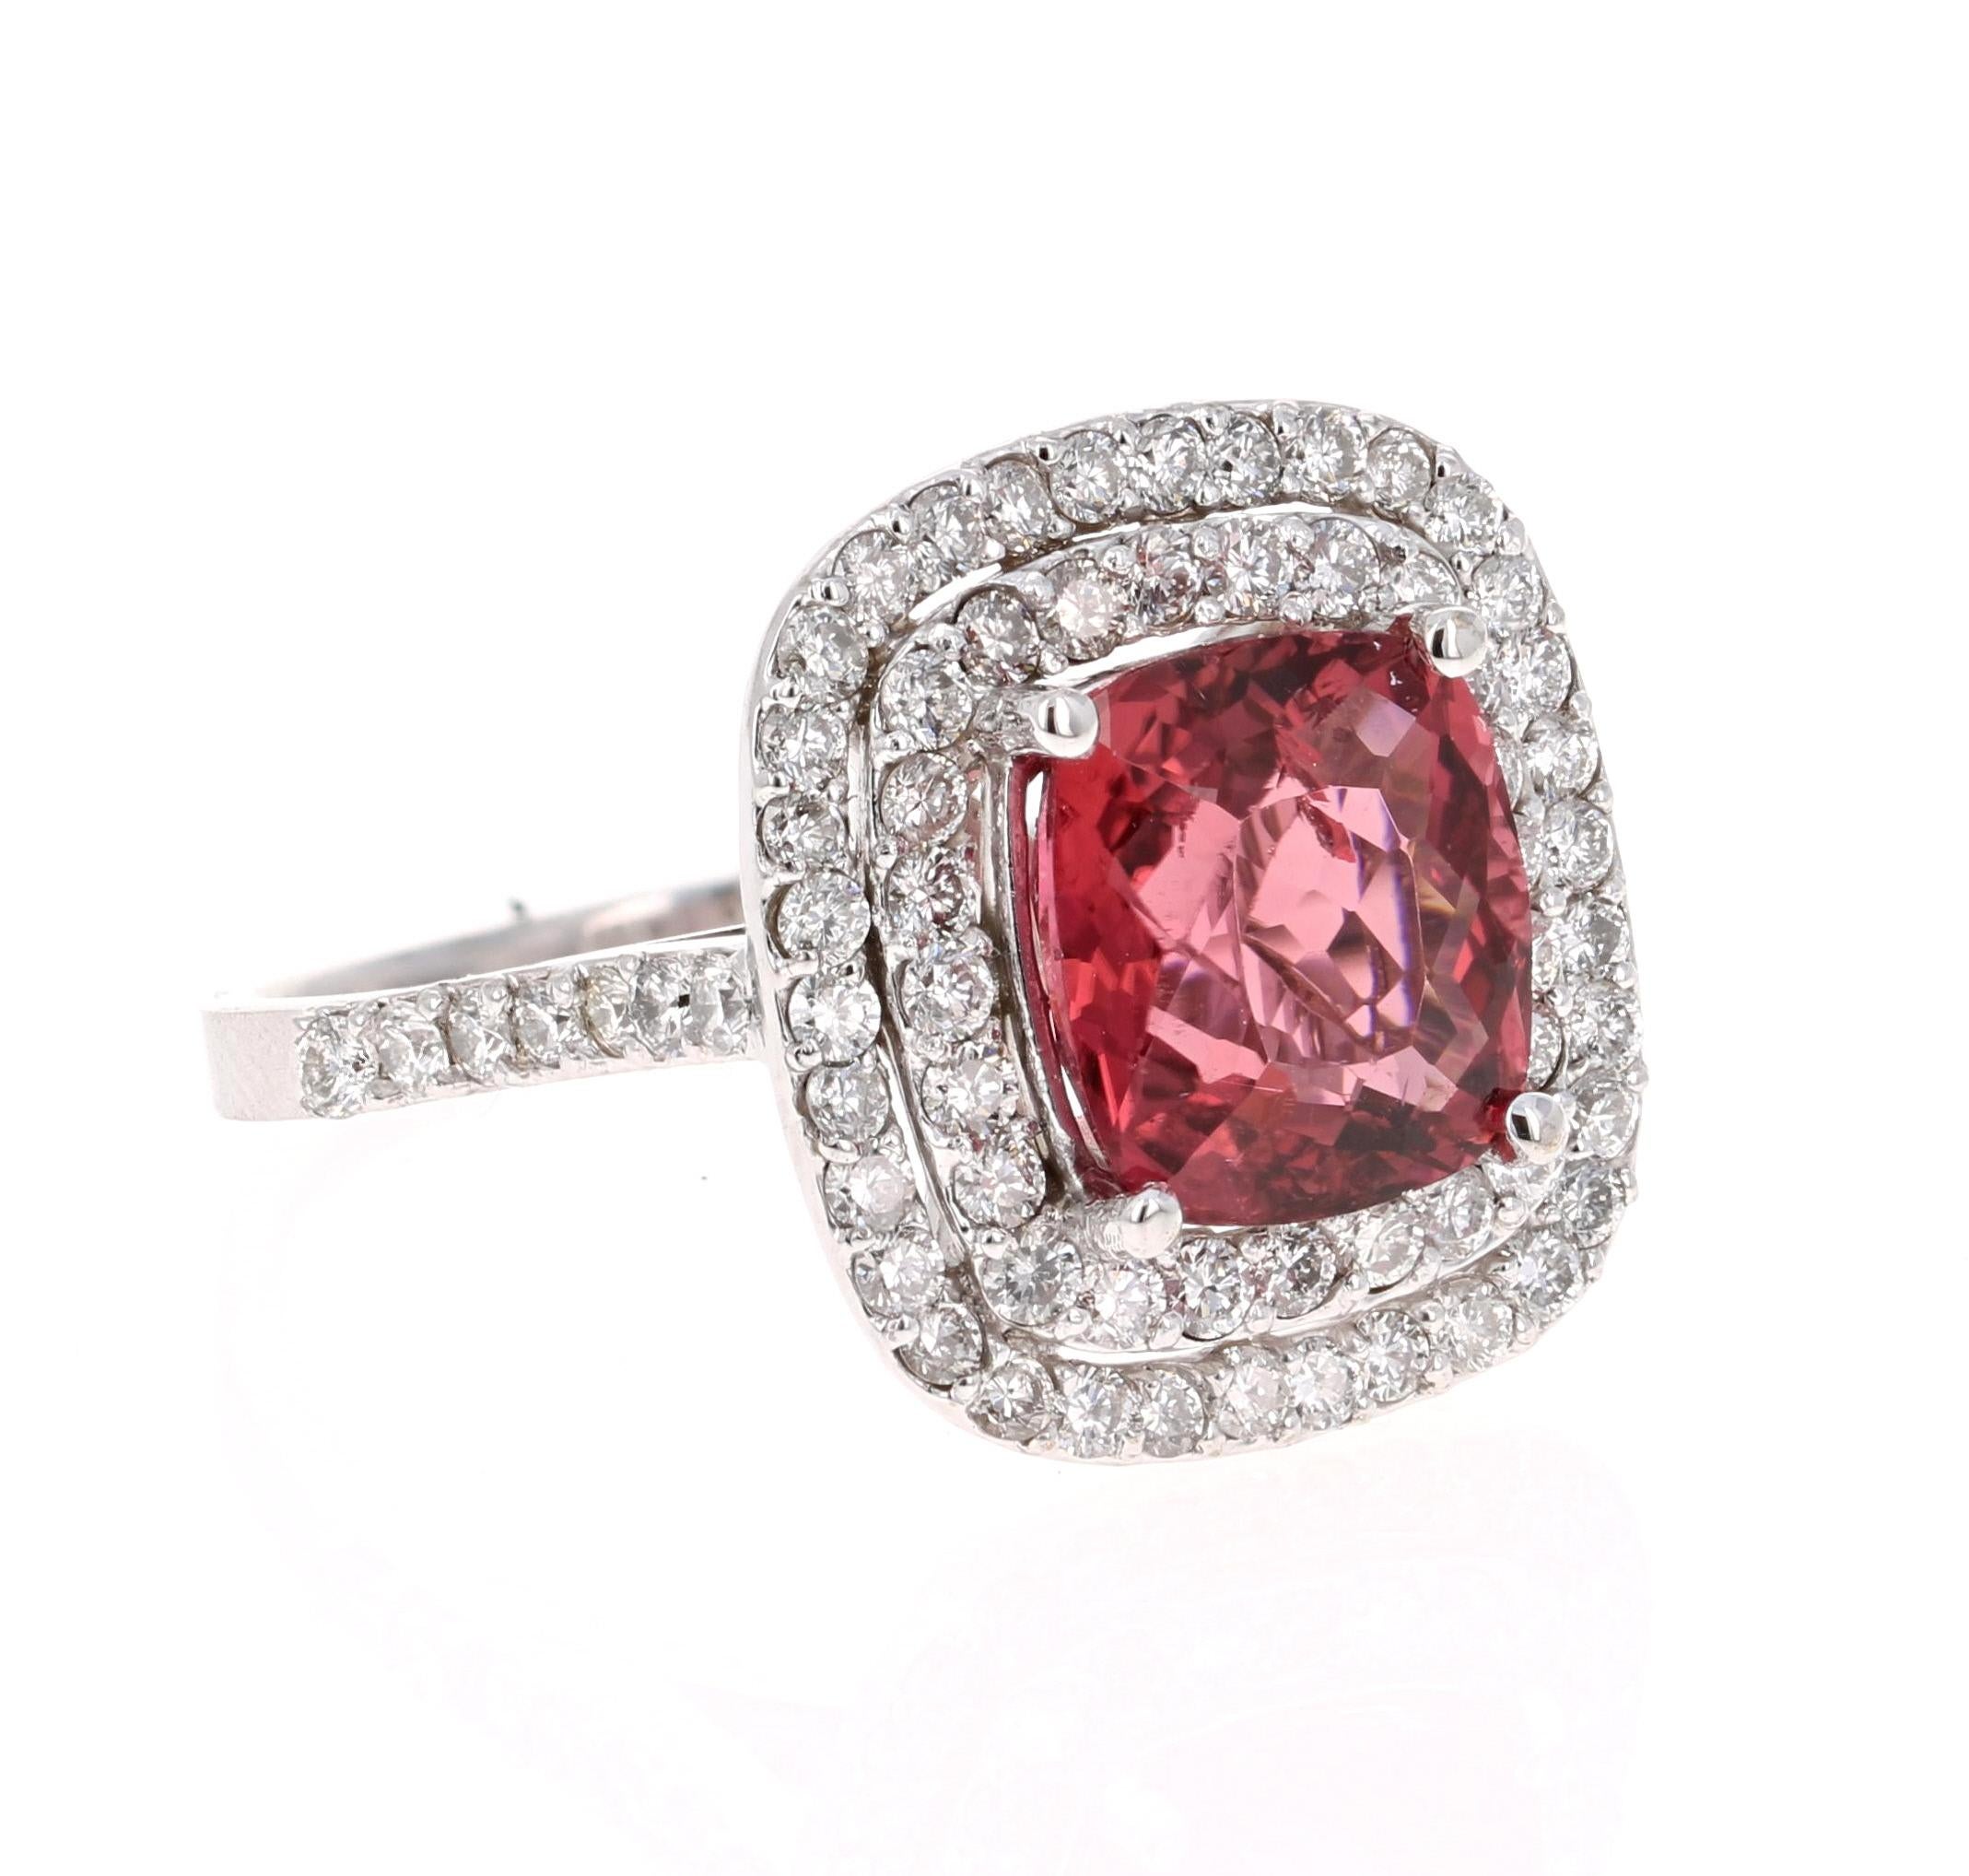 Gorgeous & Unique Cocktail Ring!

This ring has a pretty Cushion Cut Orangish-Mauve Tourmaline that weighs 3.34 Carats. Floating around the tourmaline is 72 Round Cut Diamonds that weighs 1.16 Carats. The total carat weight of the ring is 4.50